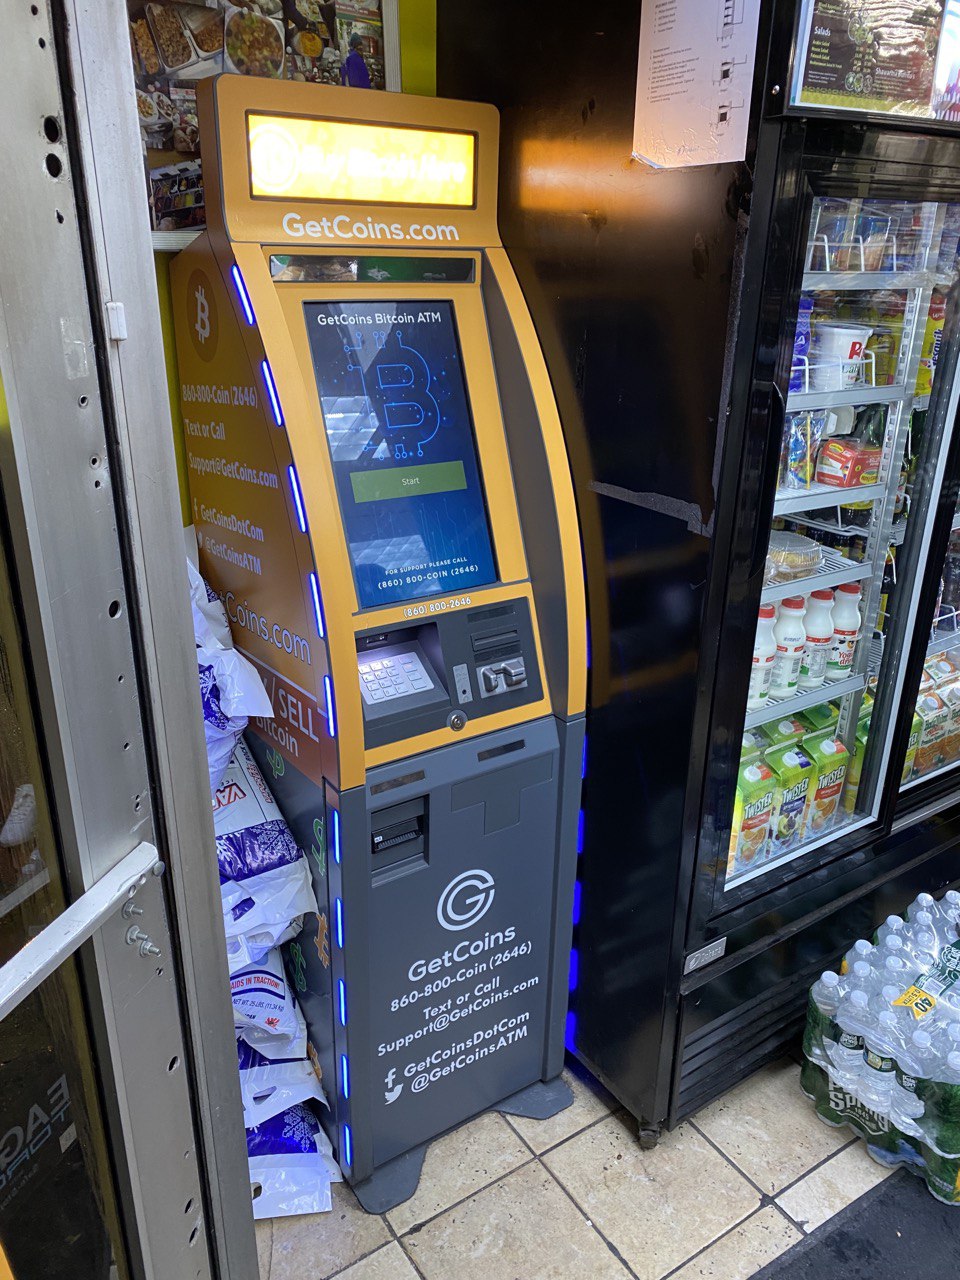 Getcoins - Bitcoin ATM - Inside of Exxon in East Orange, New Jersey